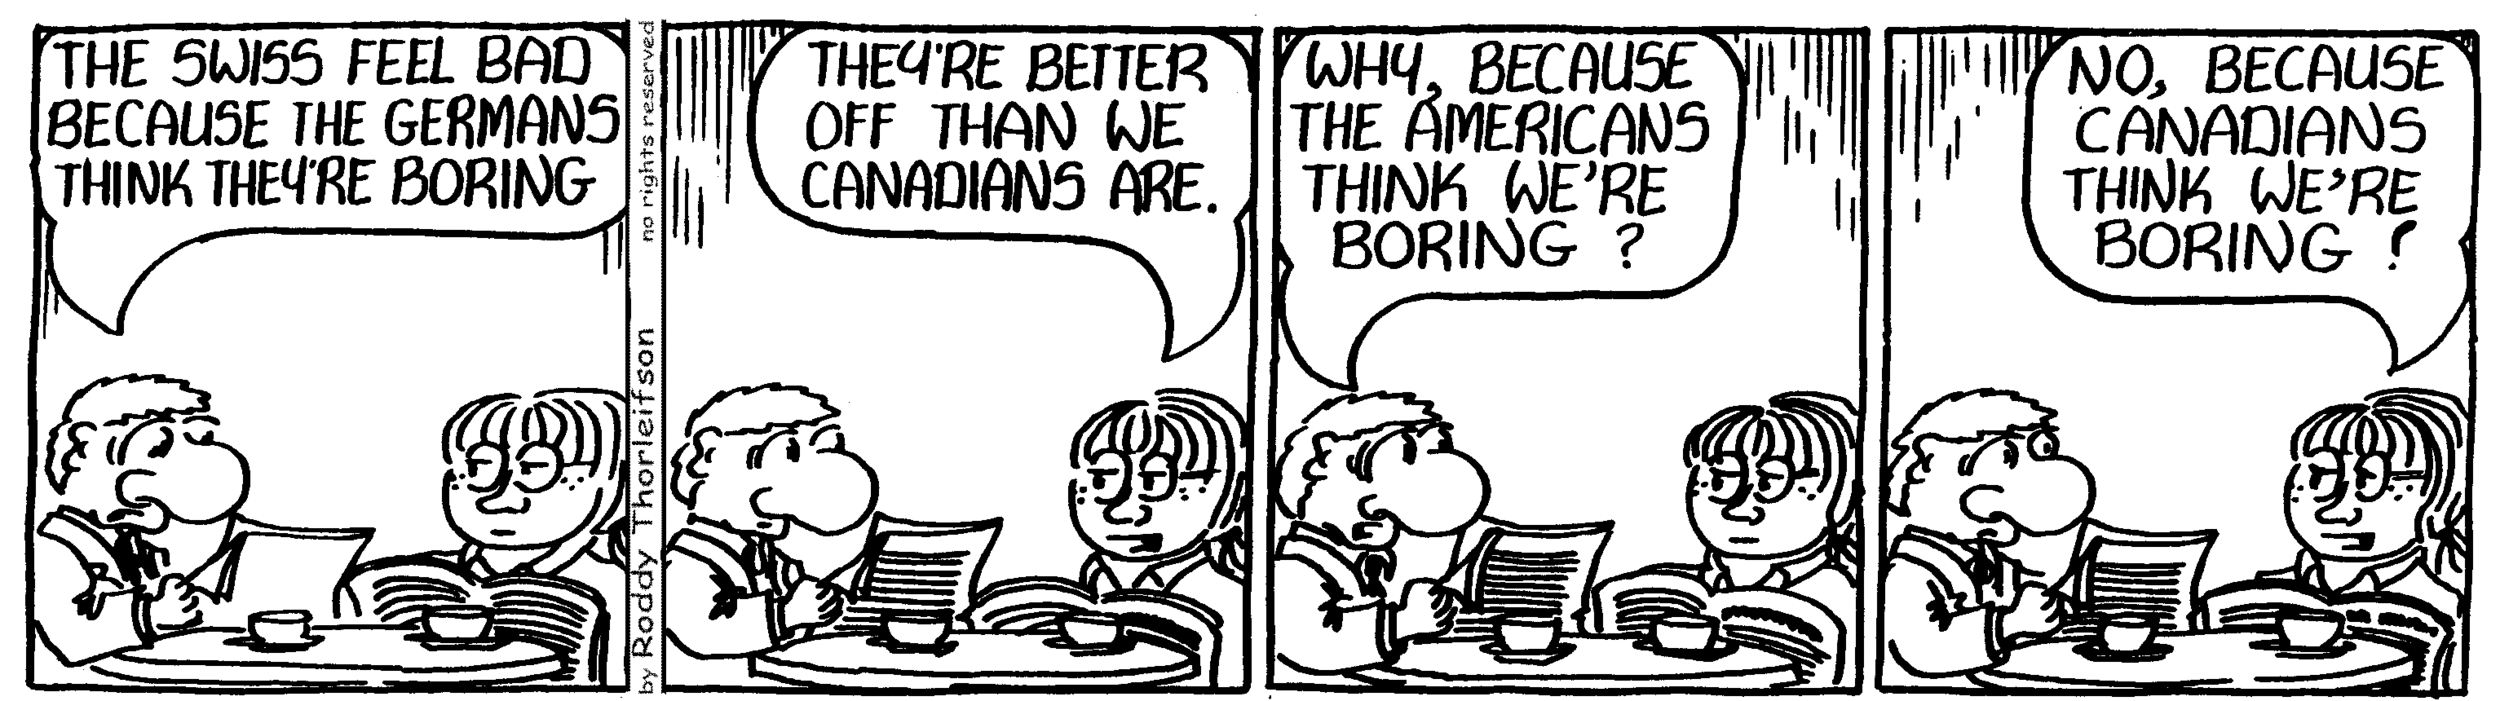 free cartoon Canada Canadian identity Americans think they're boring